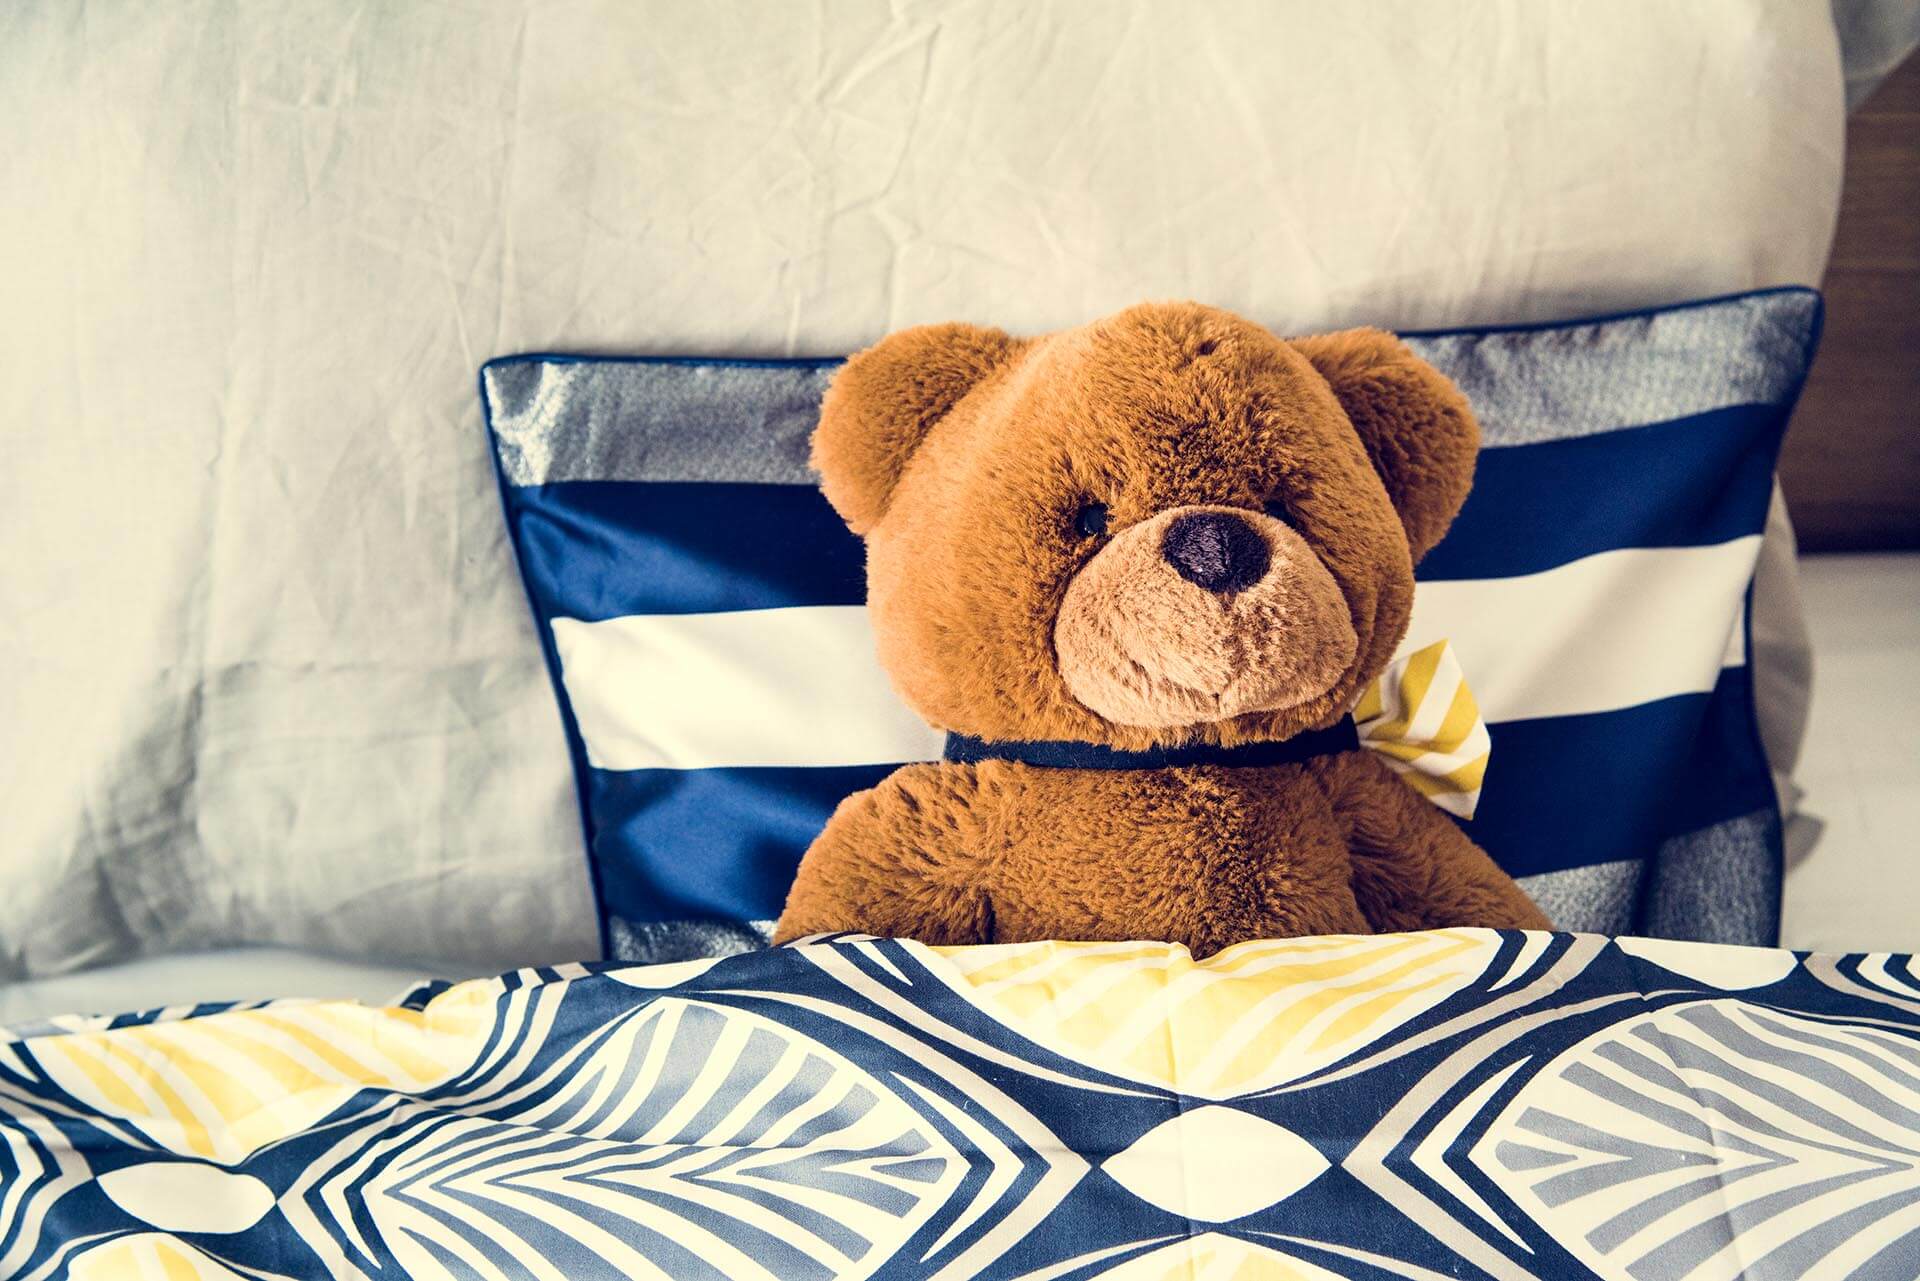 A photo of a Teddy bear on the bed